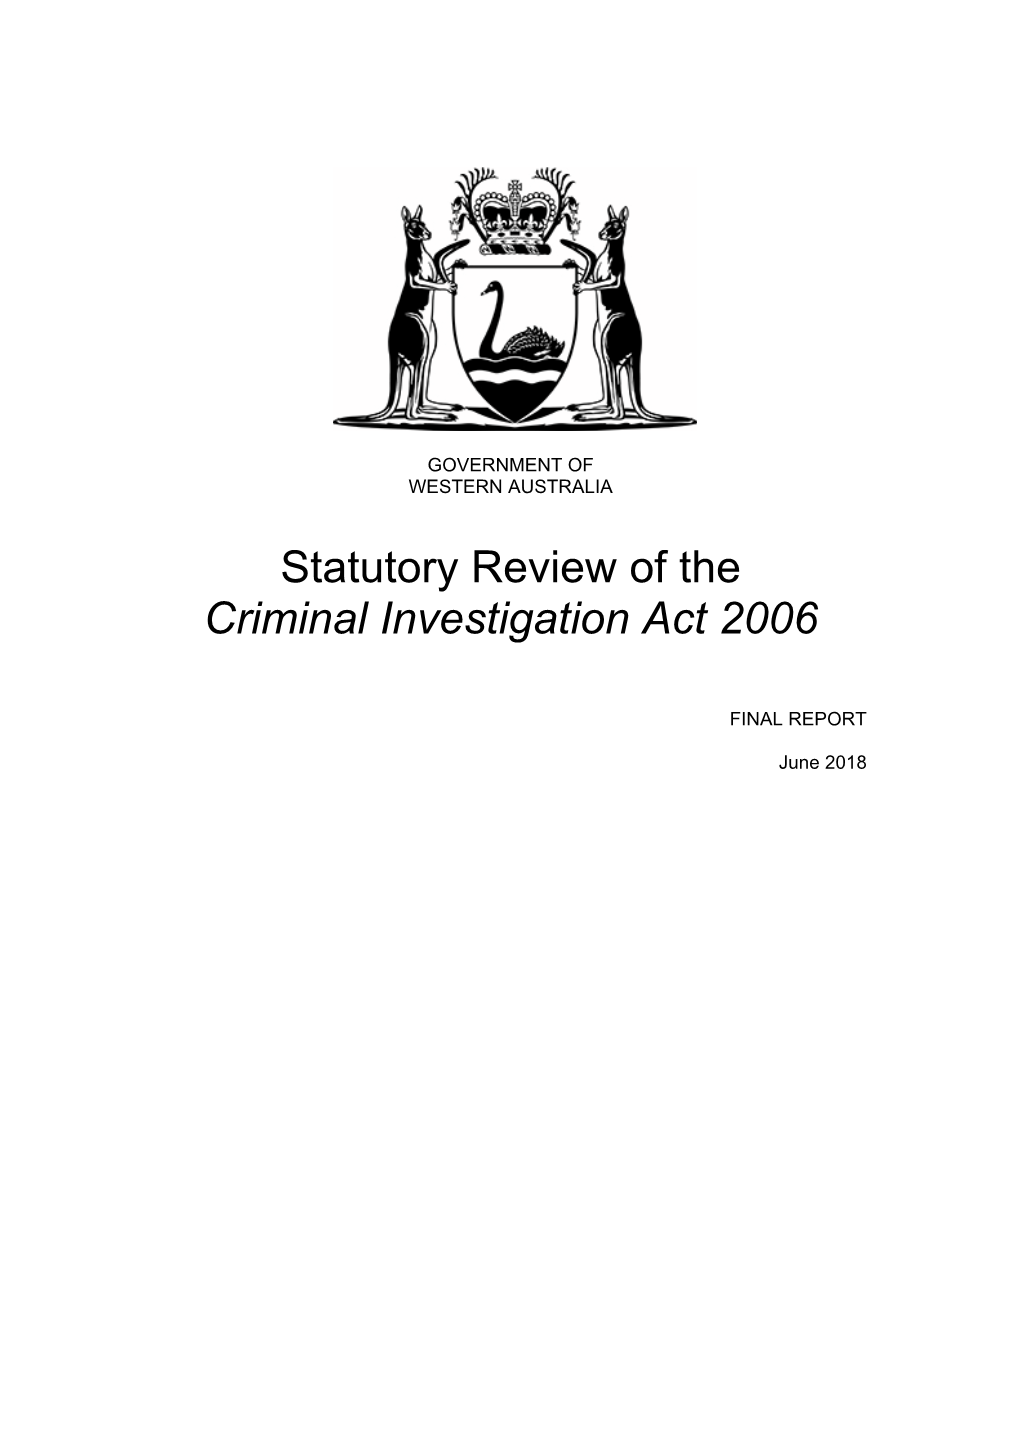 Statutory Review of the Criminal Investigation Act 2006